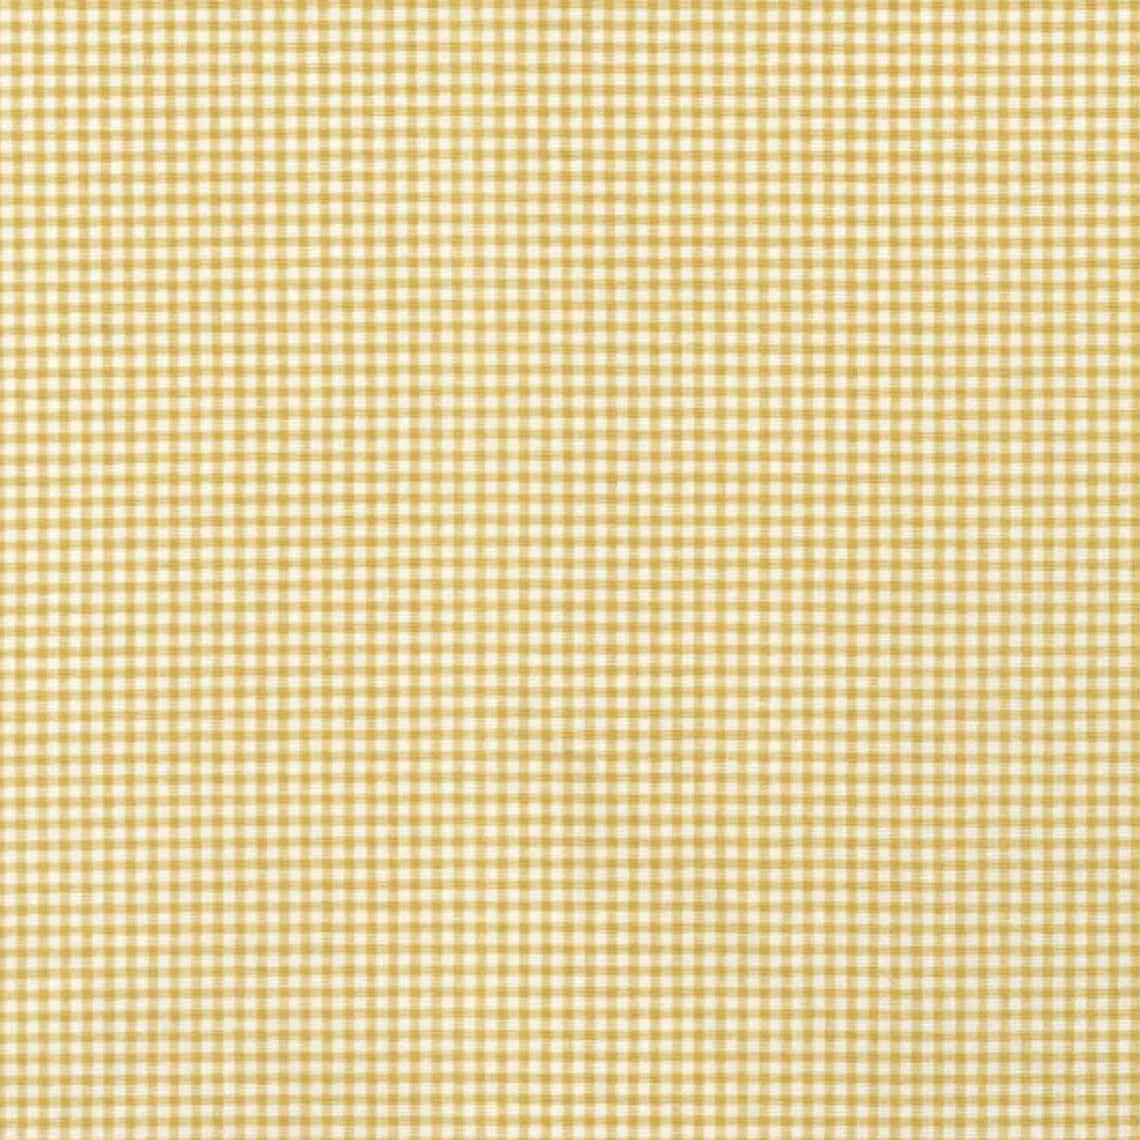 pinch pleated curtain panels pair in farmhouse barley yellow gold gingham check